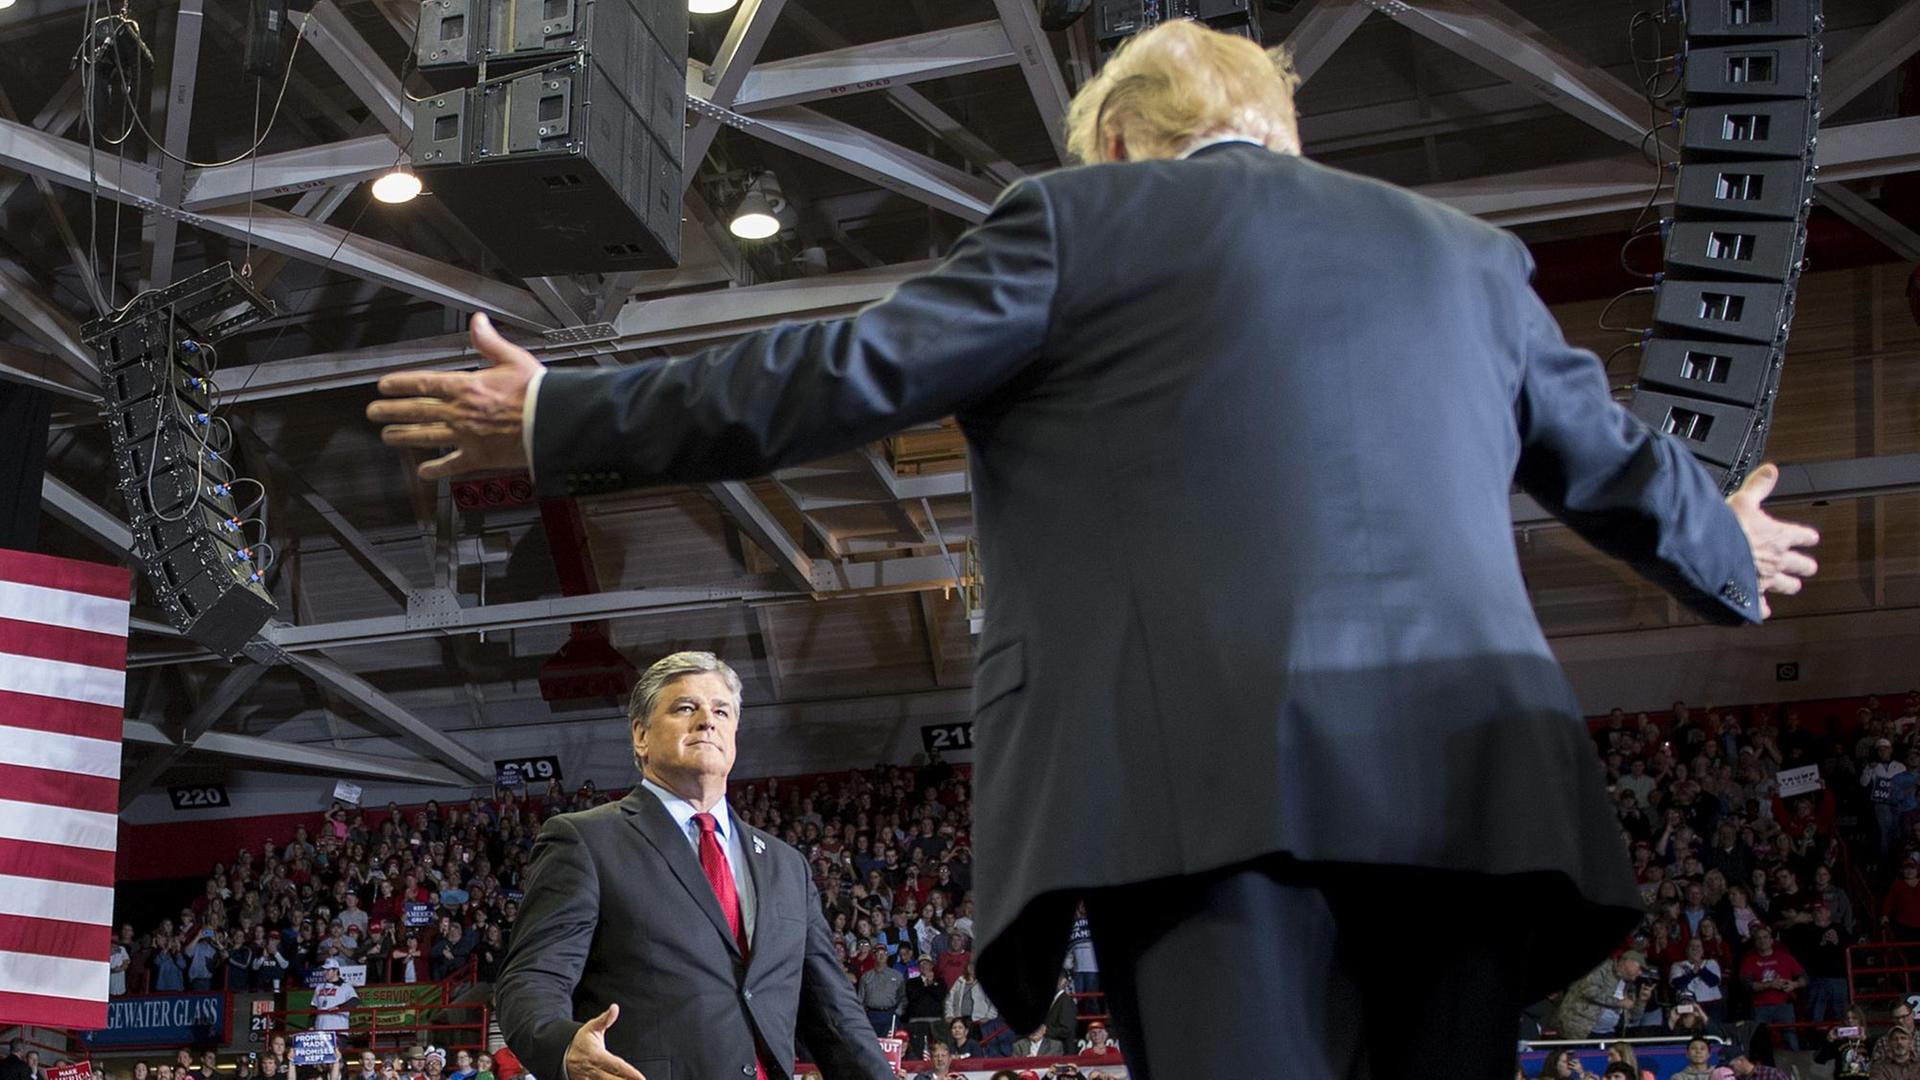 US President Donald Trump greets talk show host Sean Hannity at a Make America Great Again rally in Cape Girardeau, Missouri on November 5, 2018. (Photo by Jim WATSON / AFP)